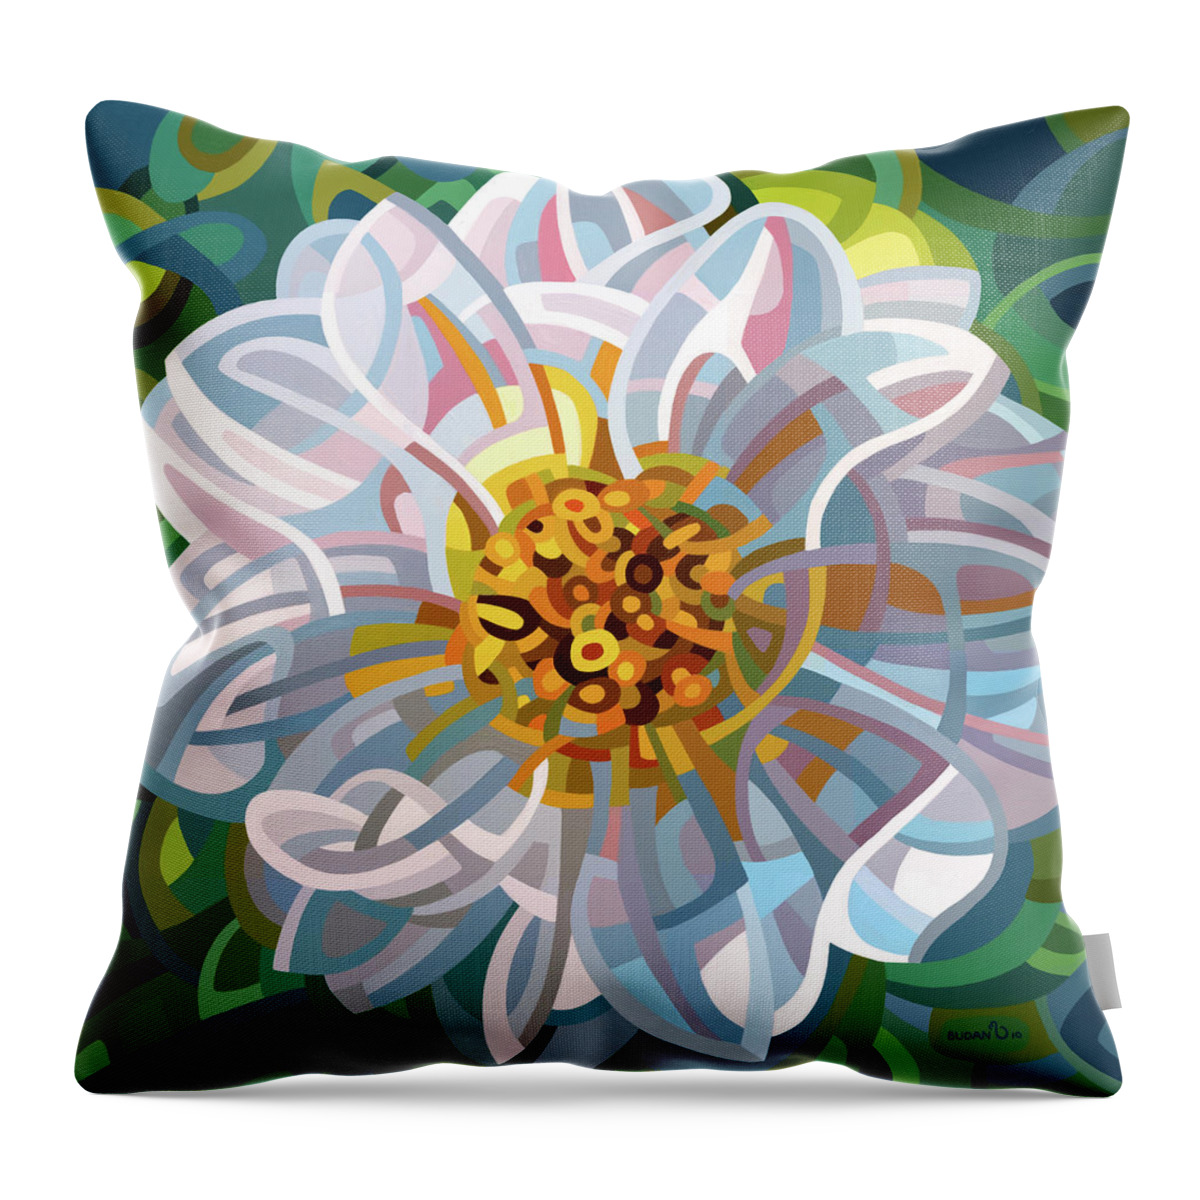 Fine Art Throw Pillow featuring the painting Solitaire by Mandy Budan